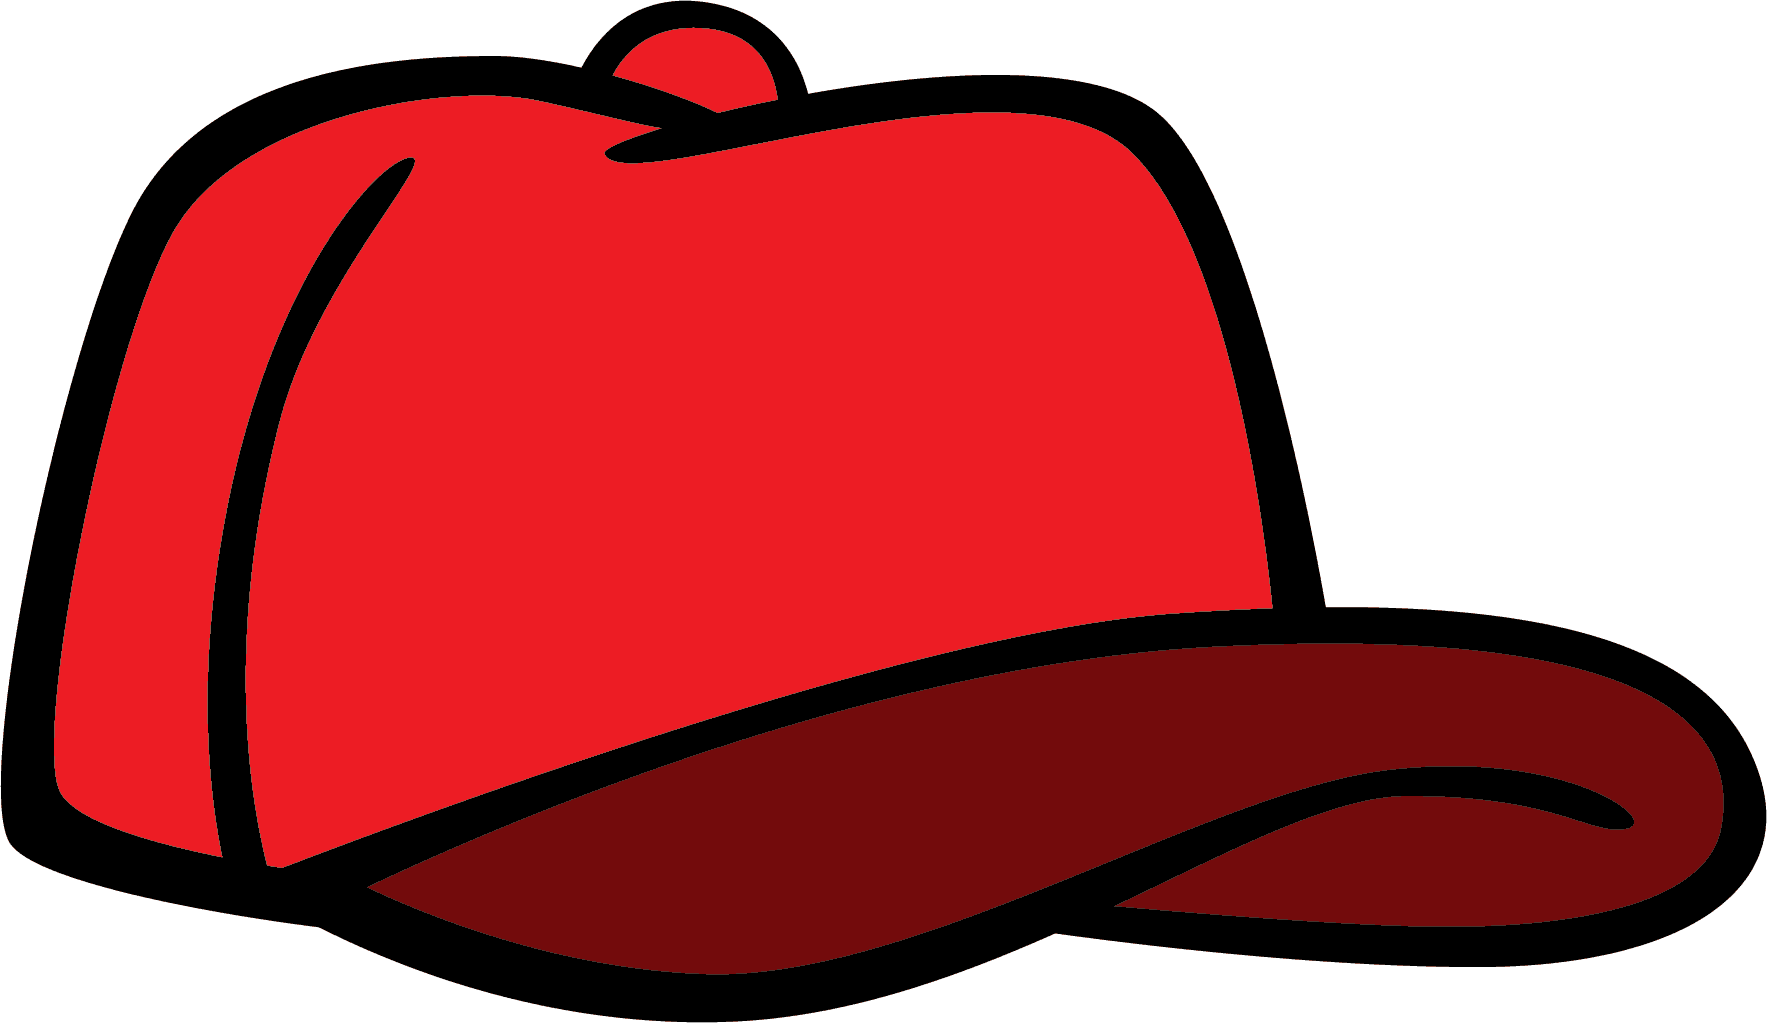 red hat clip art download free - photo #44